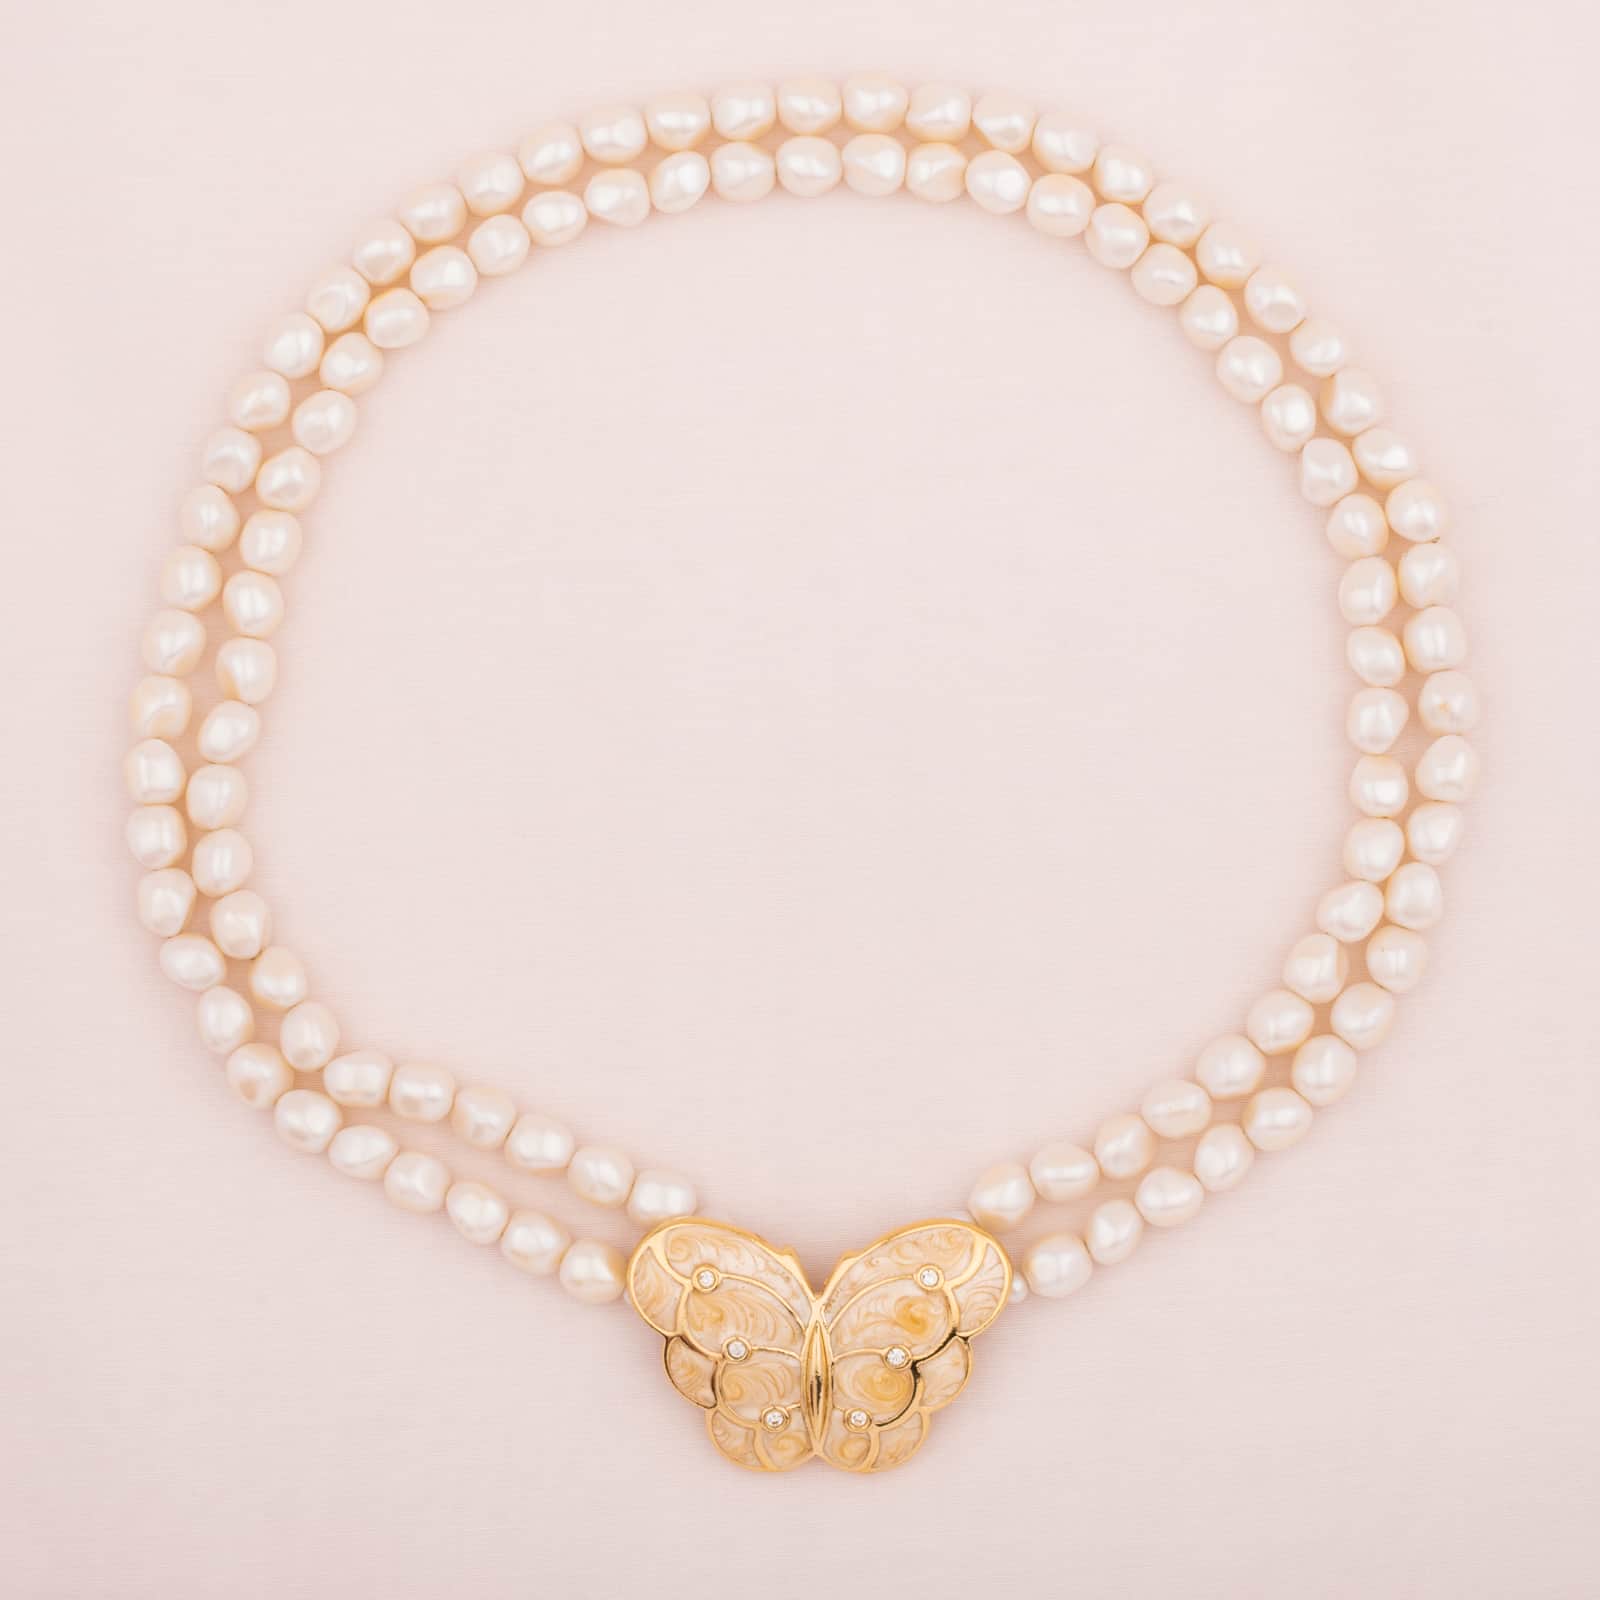 Vintage Avon Faux Pearls Single Strand Pearl Necklace Costume Fashion  Jewelry | eBay